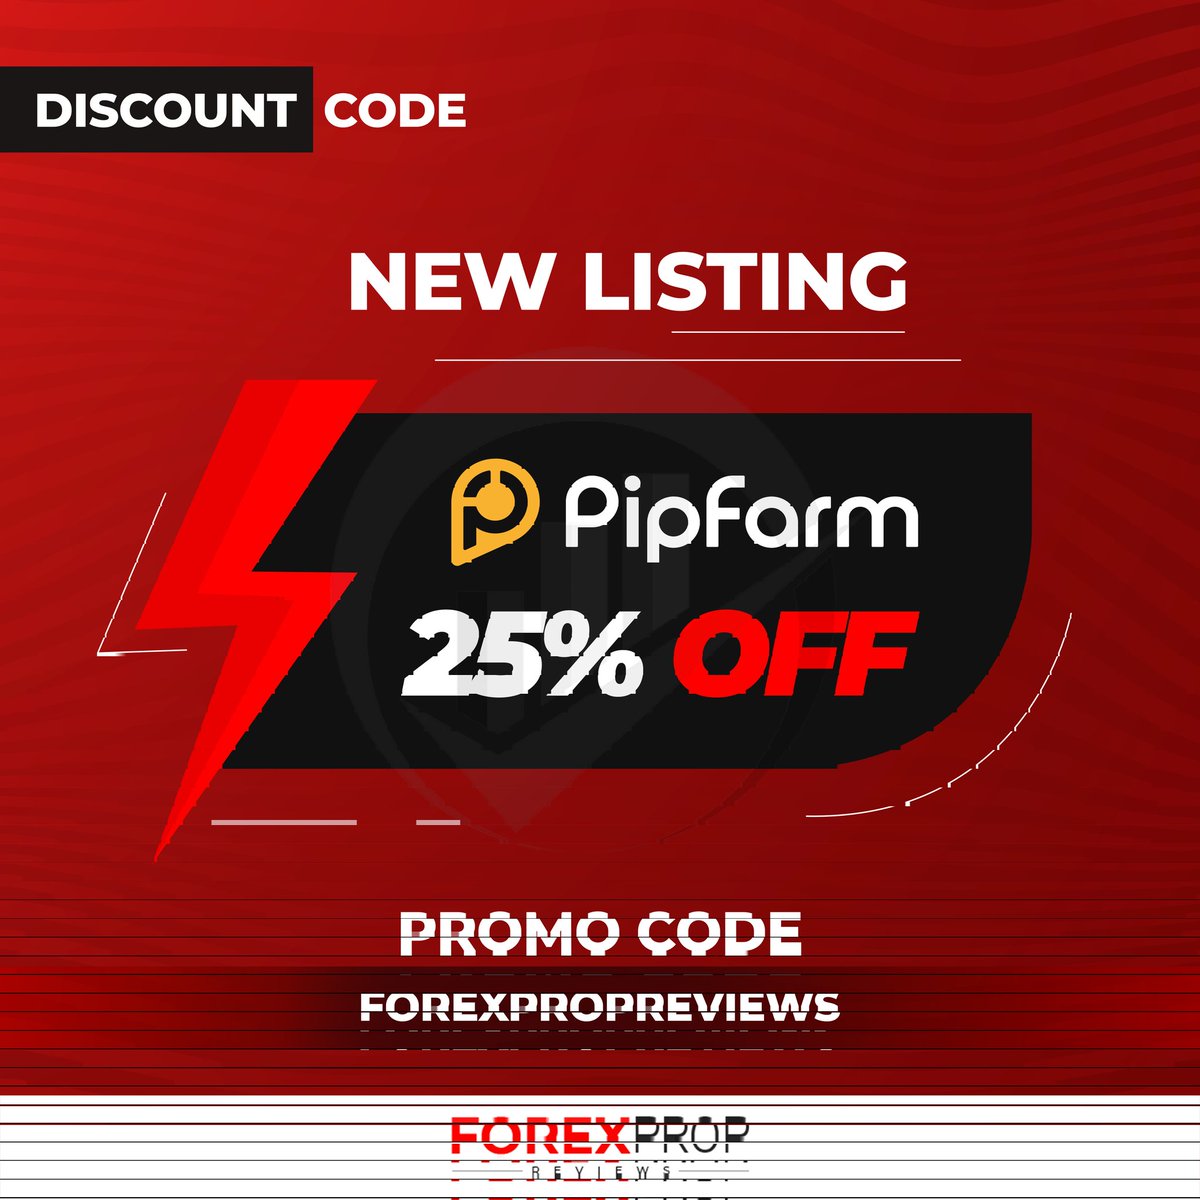 Maximize Your Trades: Grab 25% Off with Code 'FOREXPROPREVIEWS' – Exclusive Offer On Pipfarm
#discountcode #forex #fpr